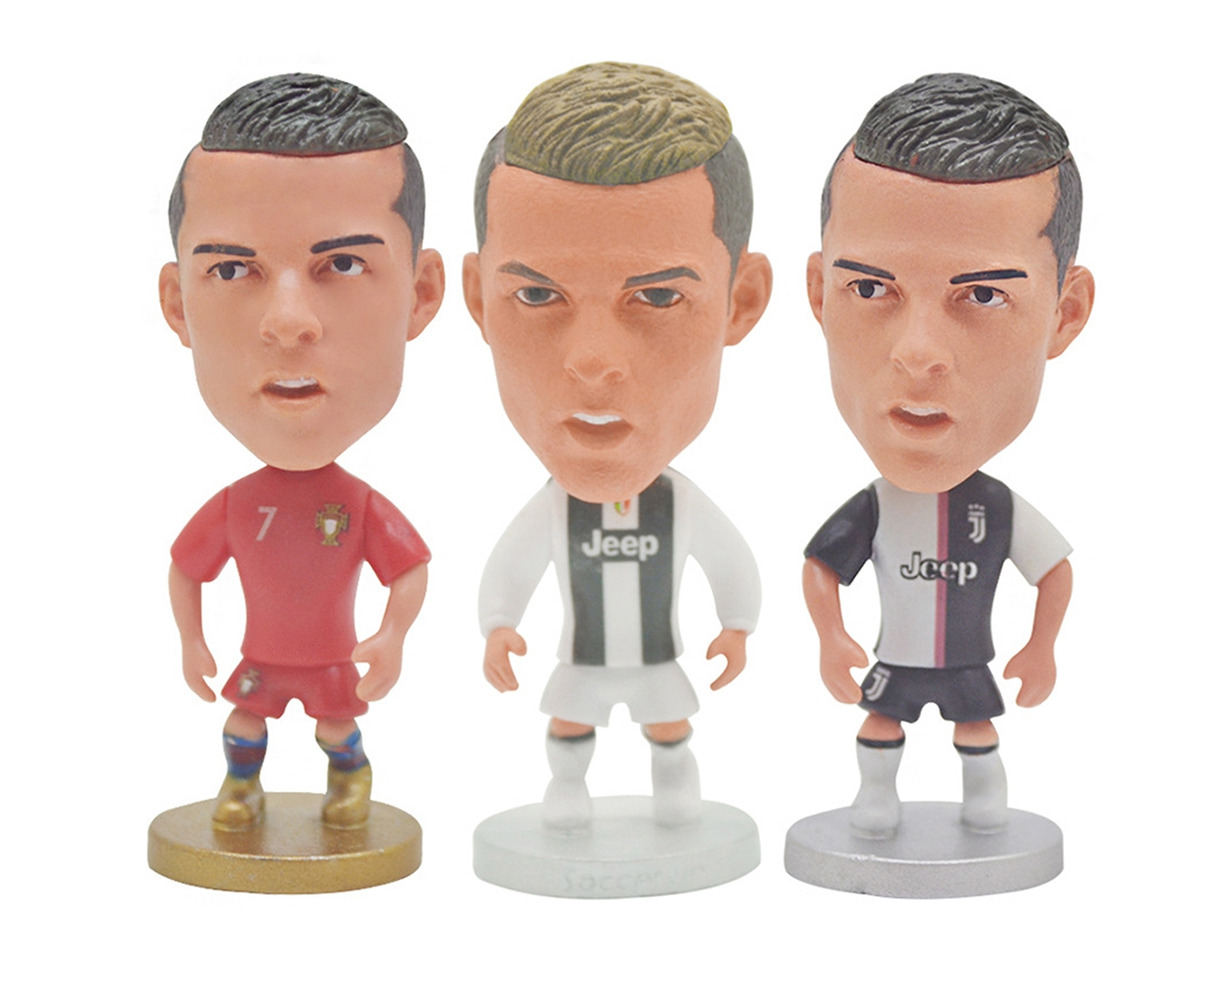 Brother Continuous enthusiasm 2020 European Nations Cup Soccer Star Doll JUV 7 Cristiano Ronaldo Figurine  Gift | Catch.com.au